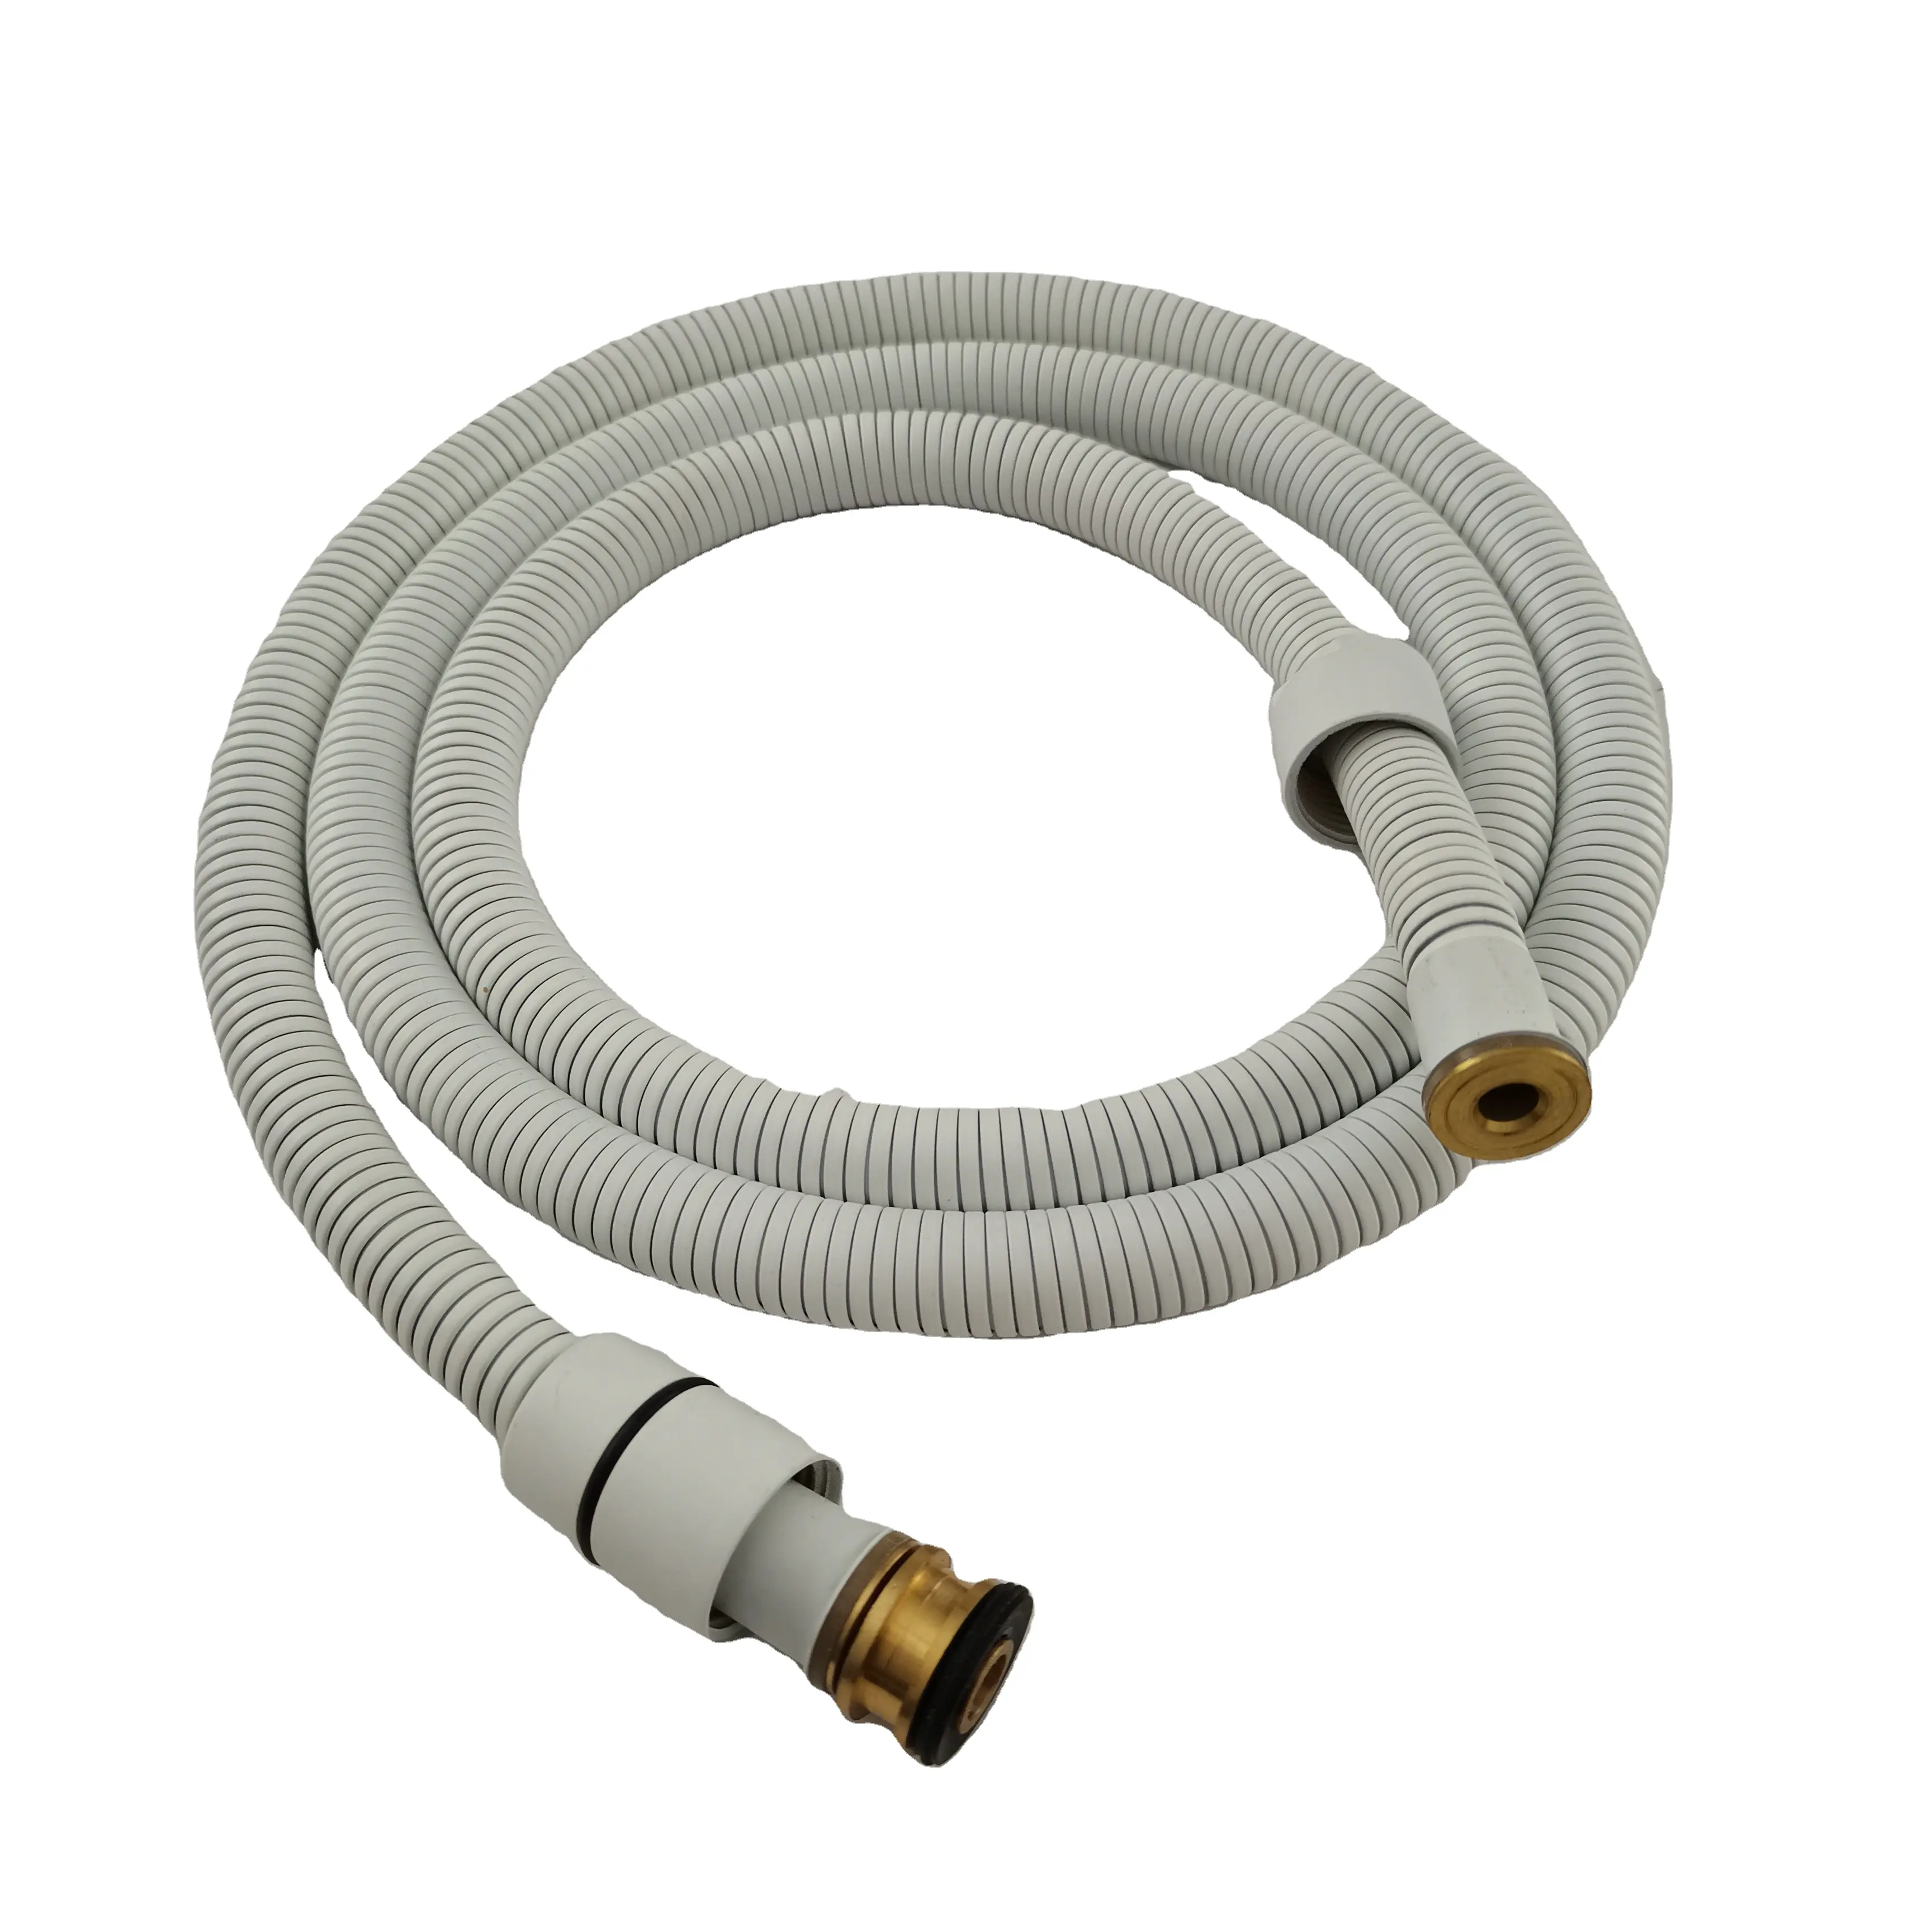 Good quality 360 degrece rotation white painting 304 stainless steel metal flexible bathtub shower mixer faucet connector hose